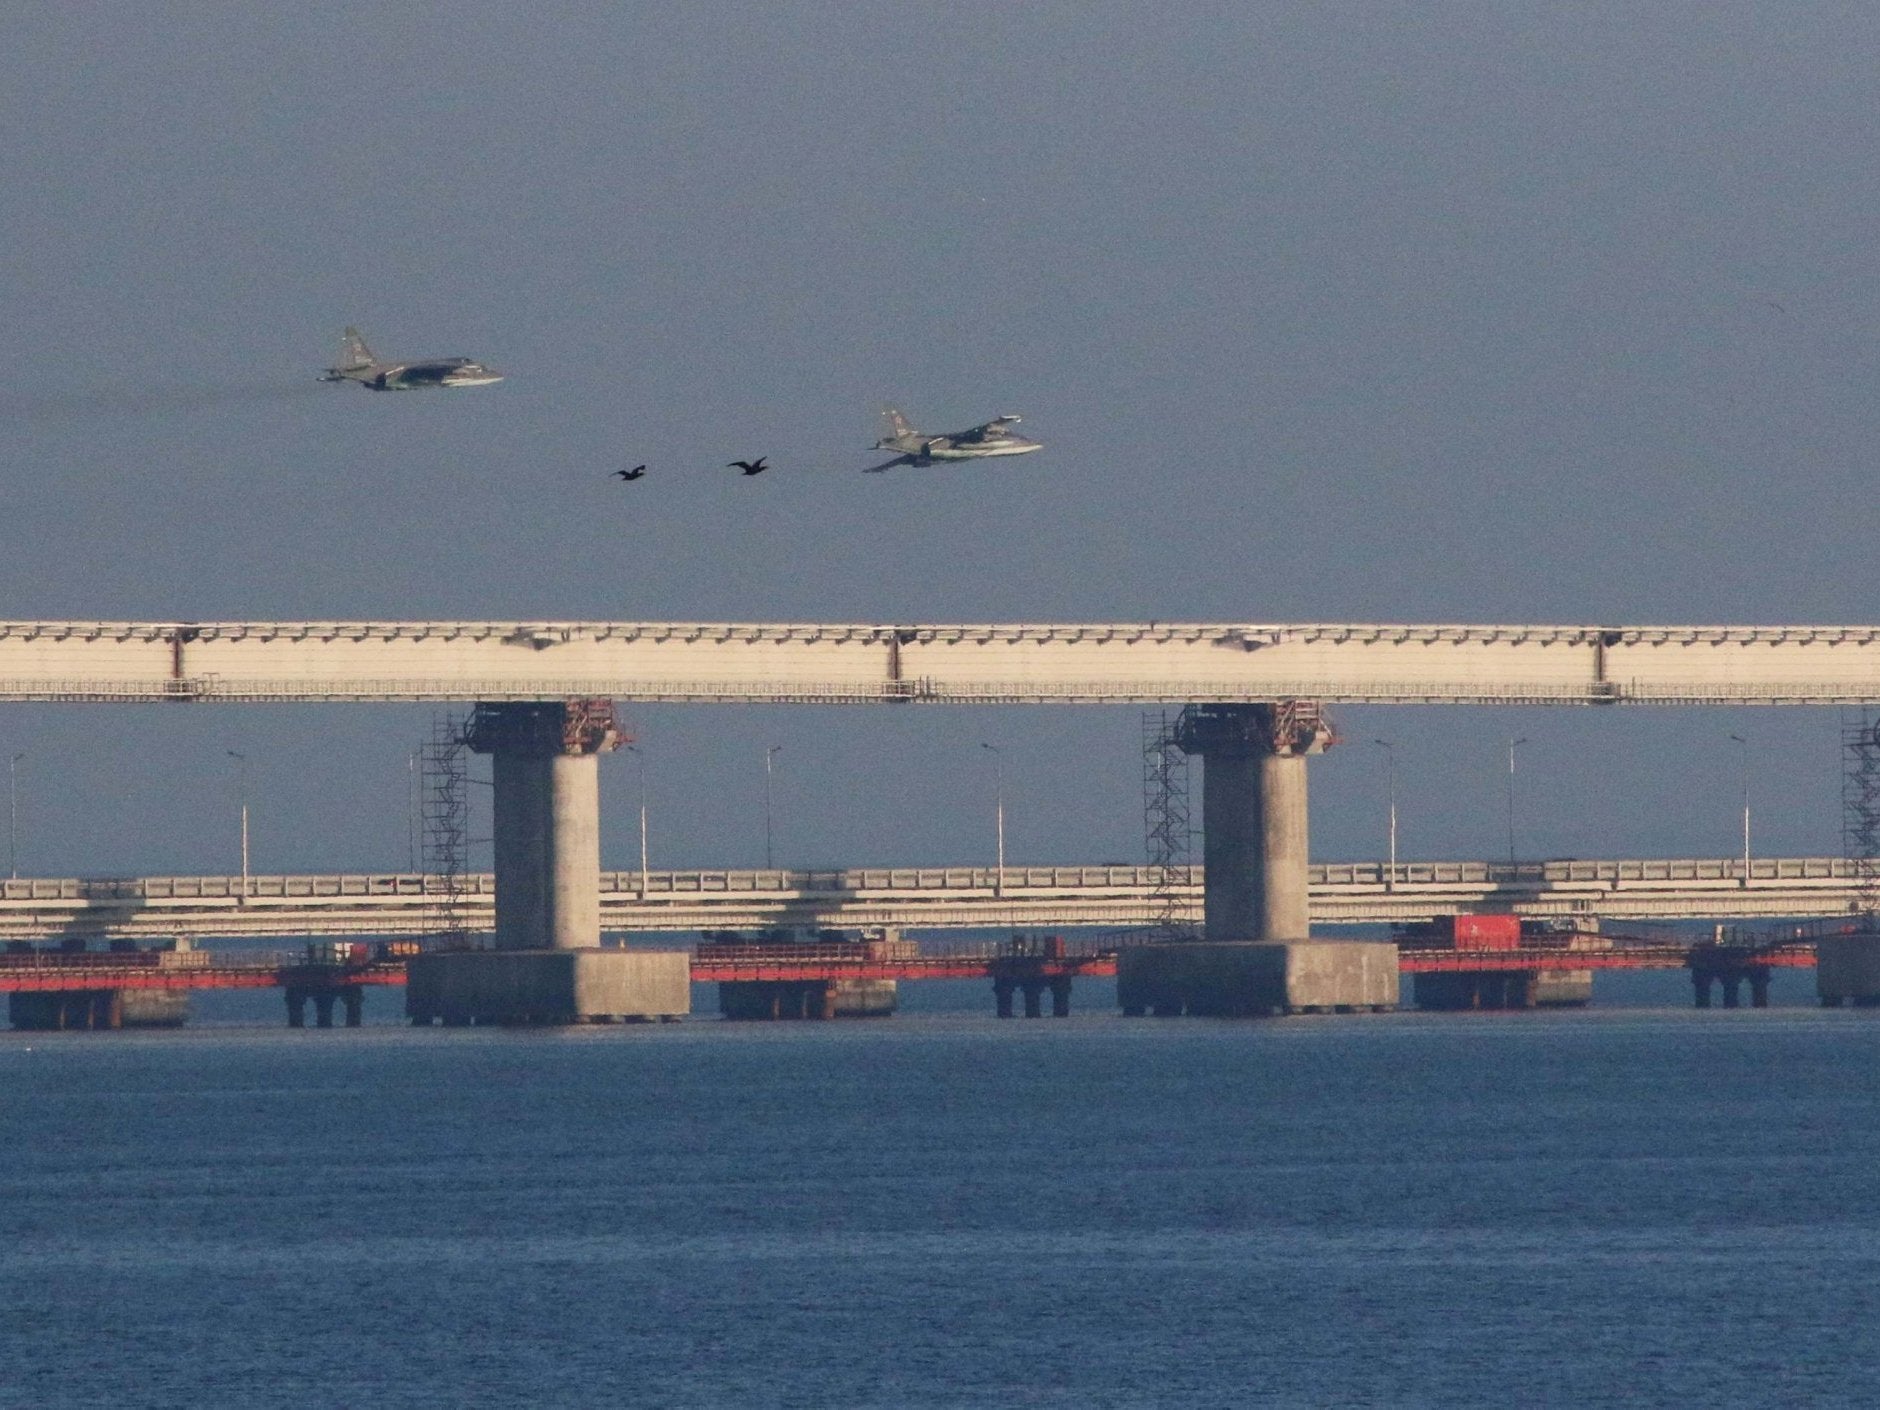 Russian jet fighters fly over a bridge connecting the Russian mainland with the Crimean peninsula